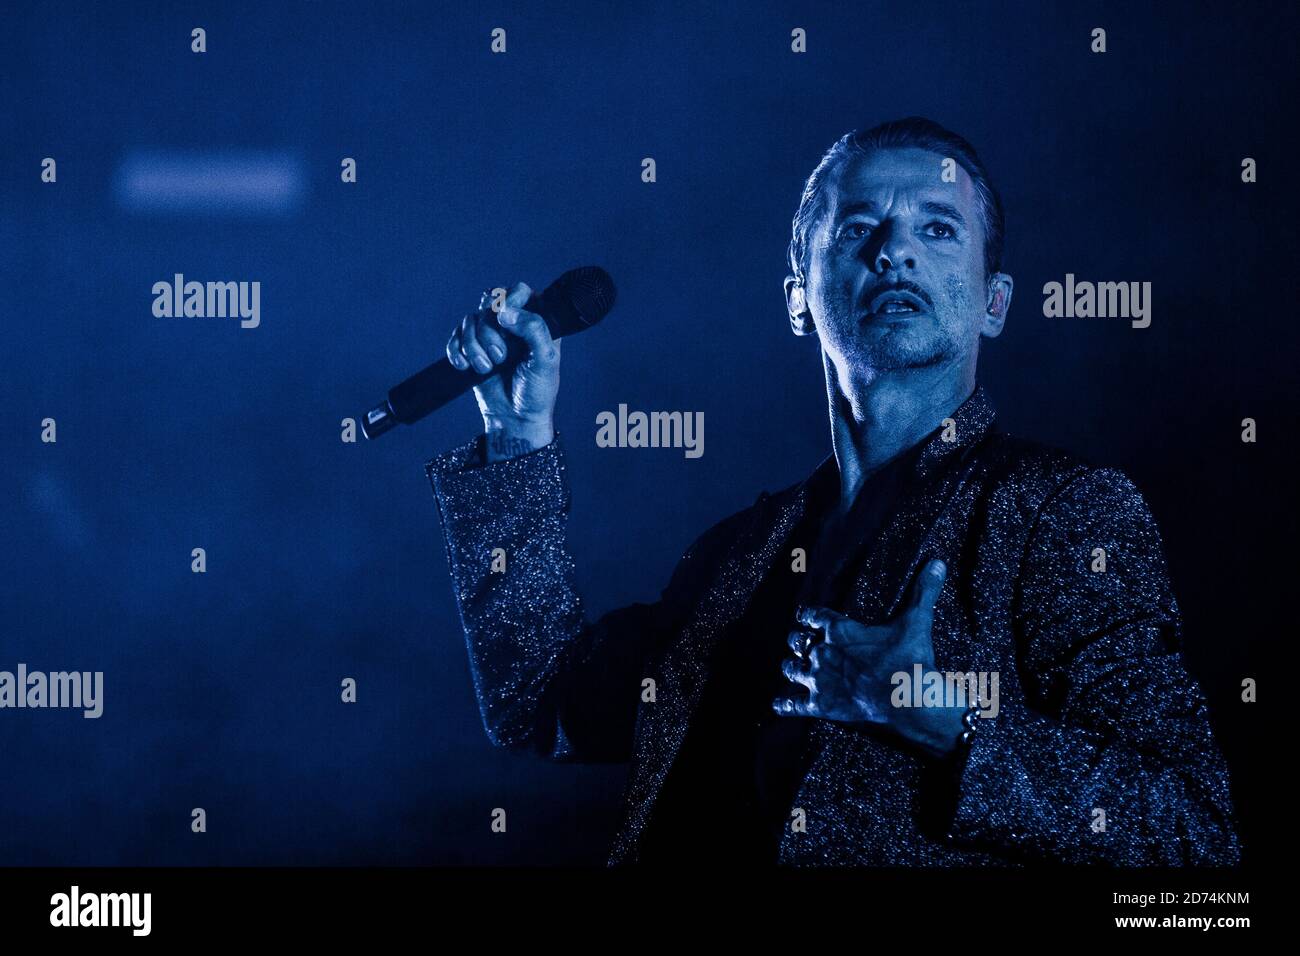 Singer David Gahan Depeche Mode High Resolution Stock Photography and  Images - Alamy